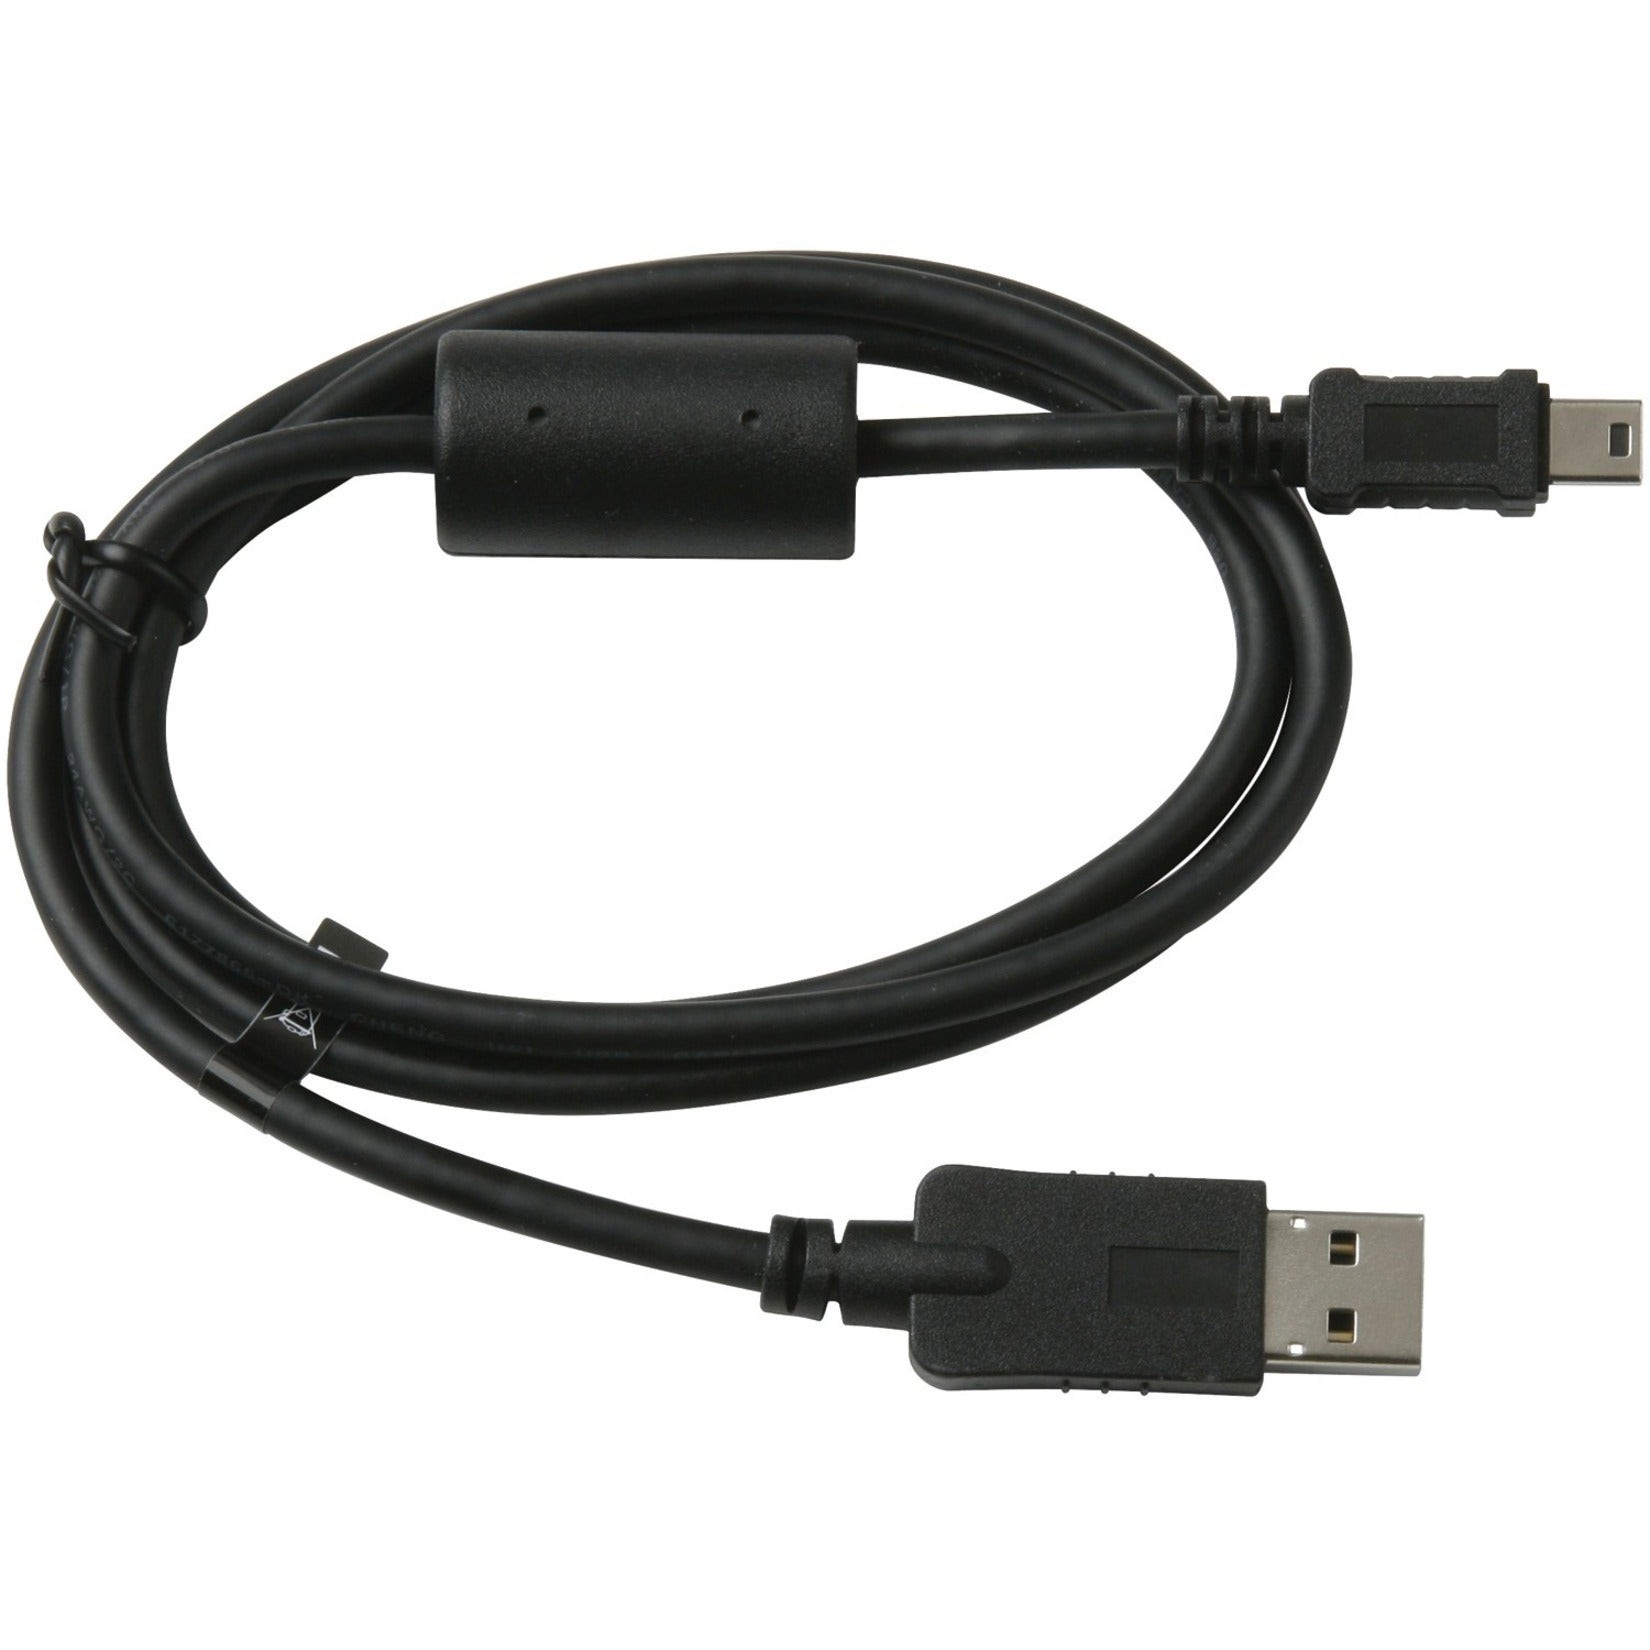 Garmin 010-10723-01 USB Cable, Data Transfer Cable for GPS Receiver